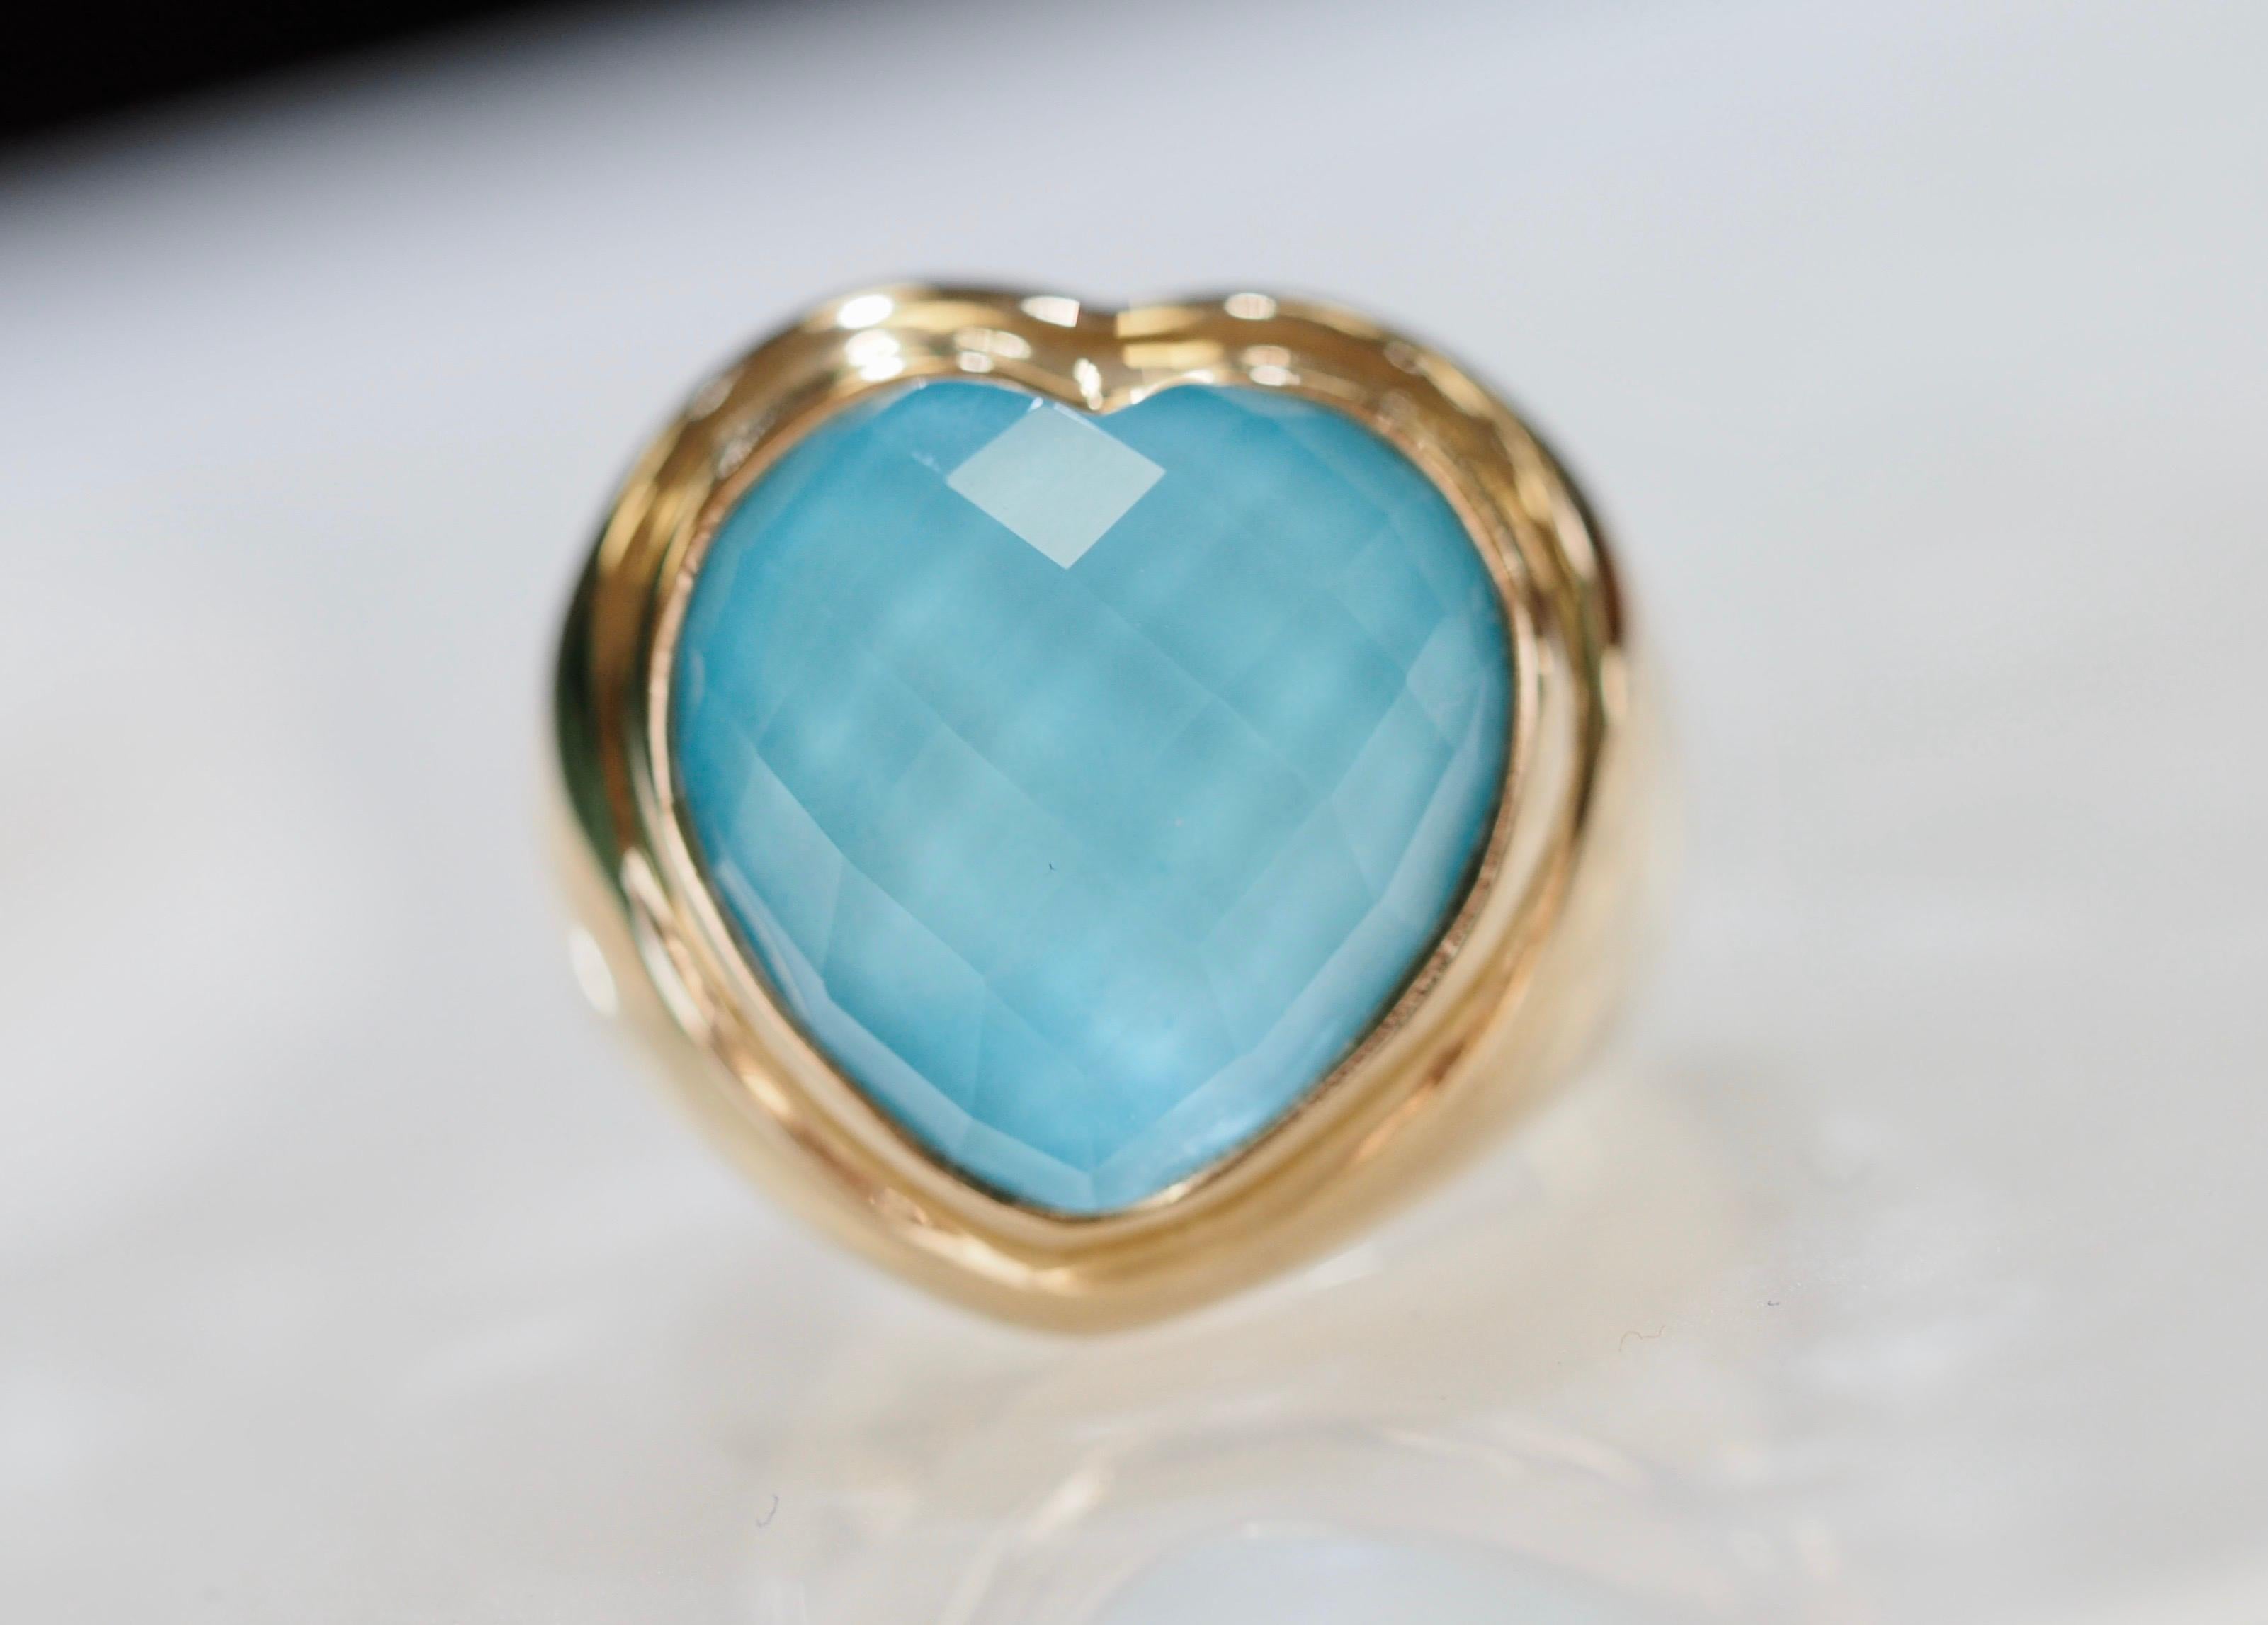 Retro 14K Yellow Gold Amazonite and Quartz Doublet Cocktail Ring is absolutely stunning. This cocktail/ fashion ring includes a heart shaped doublet that includes a vibrant amazonite with a layers of quartz over it,  giving it a stunning luminous